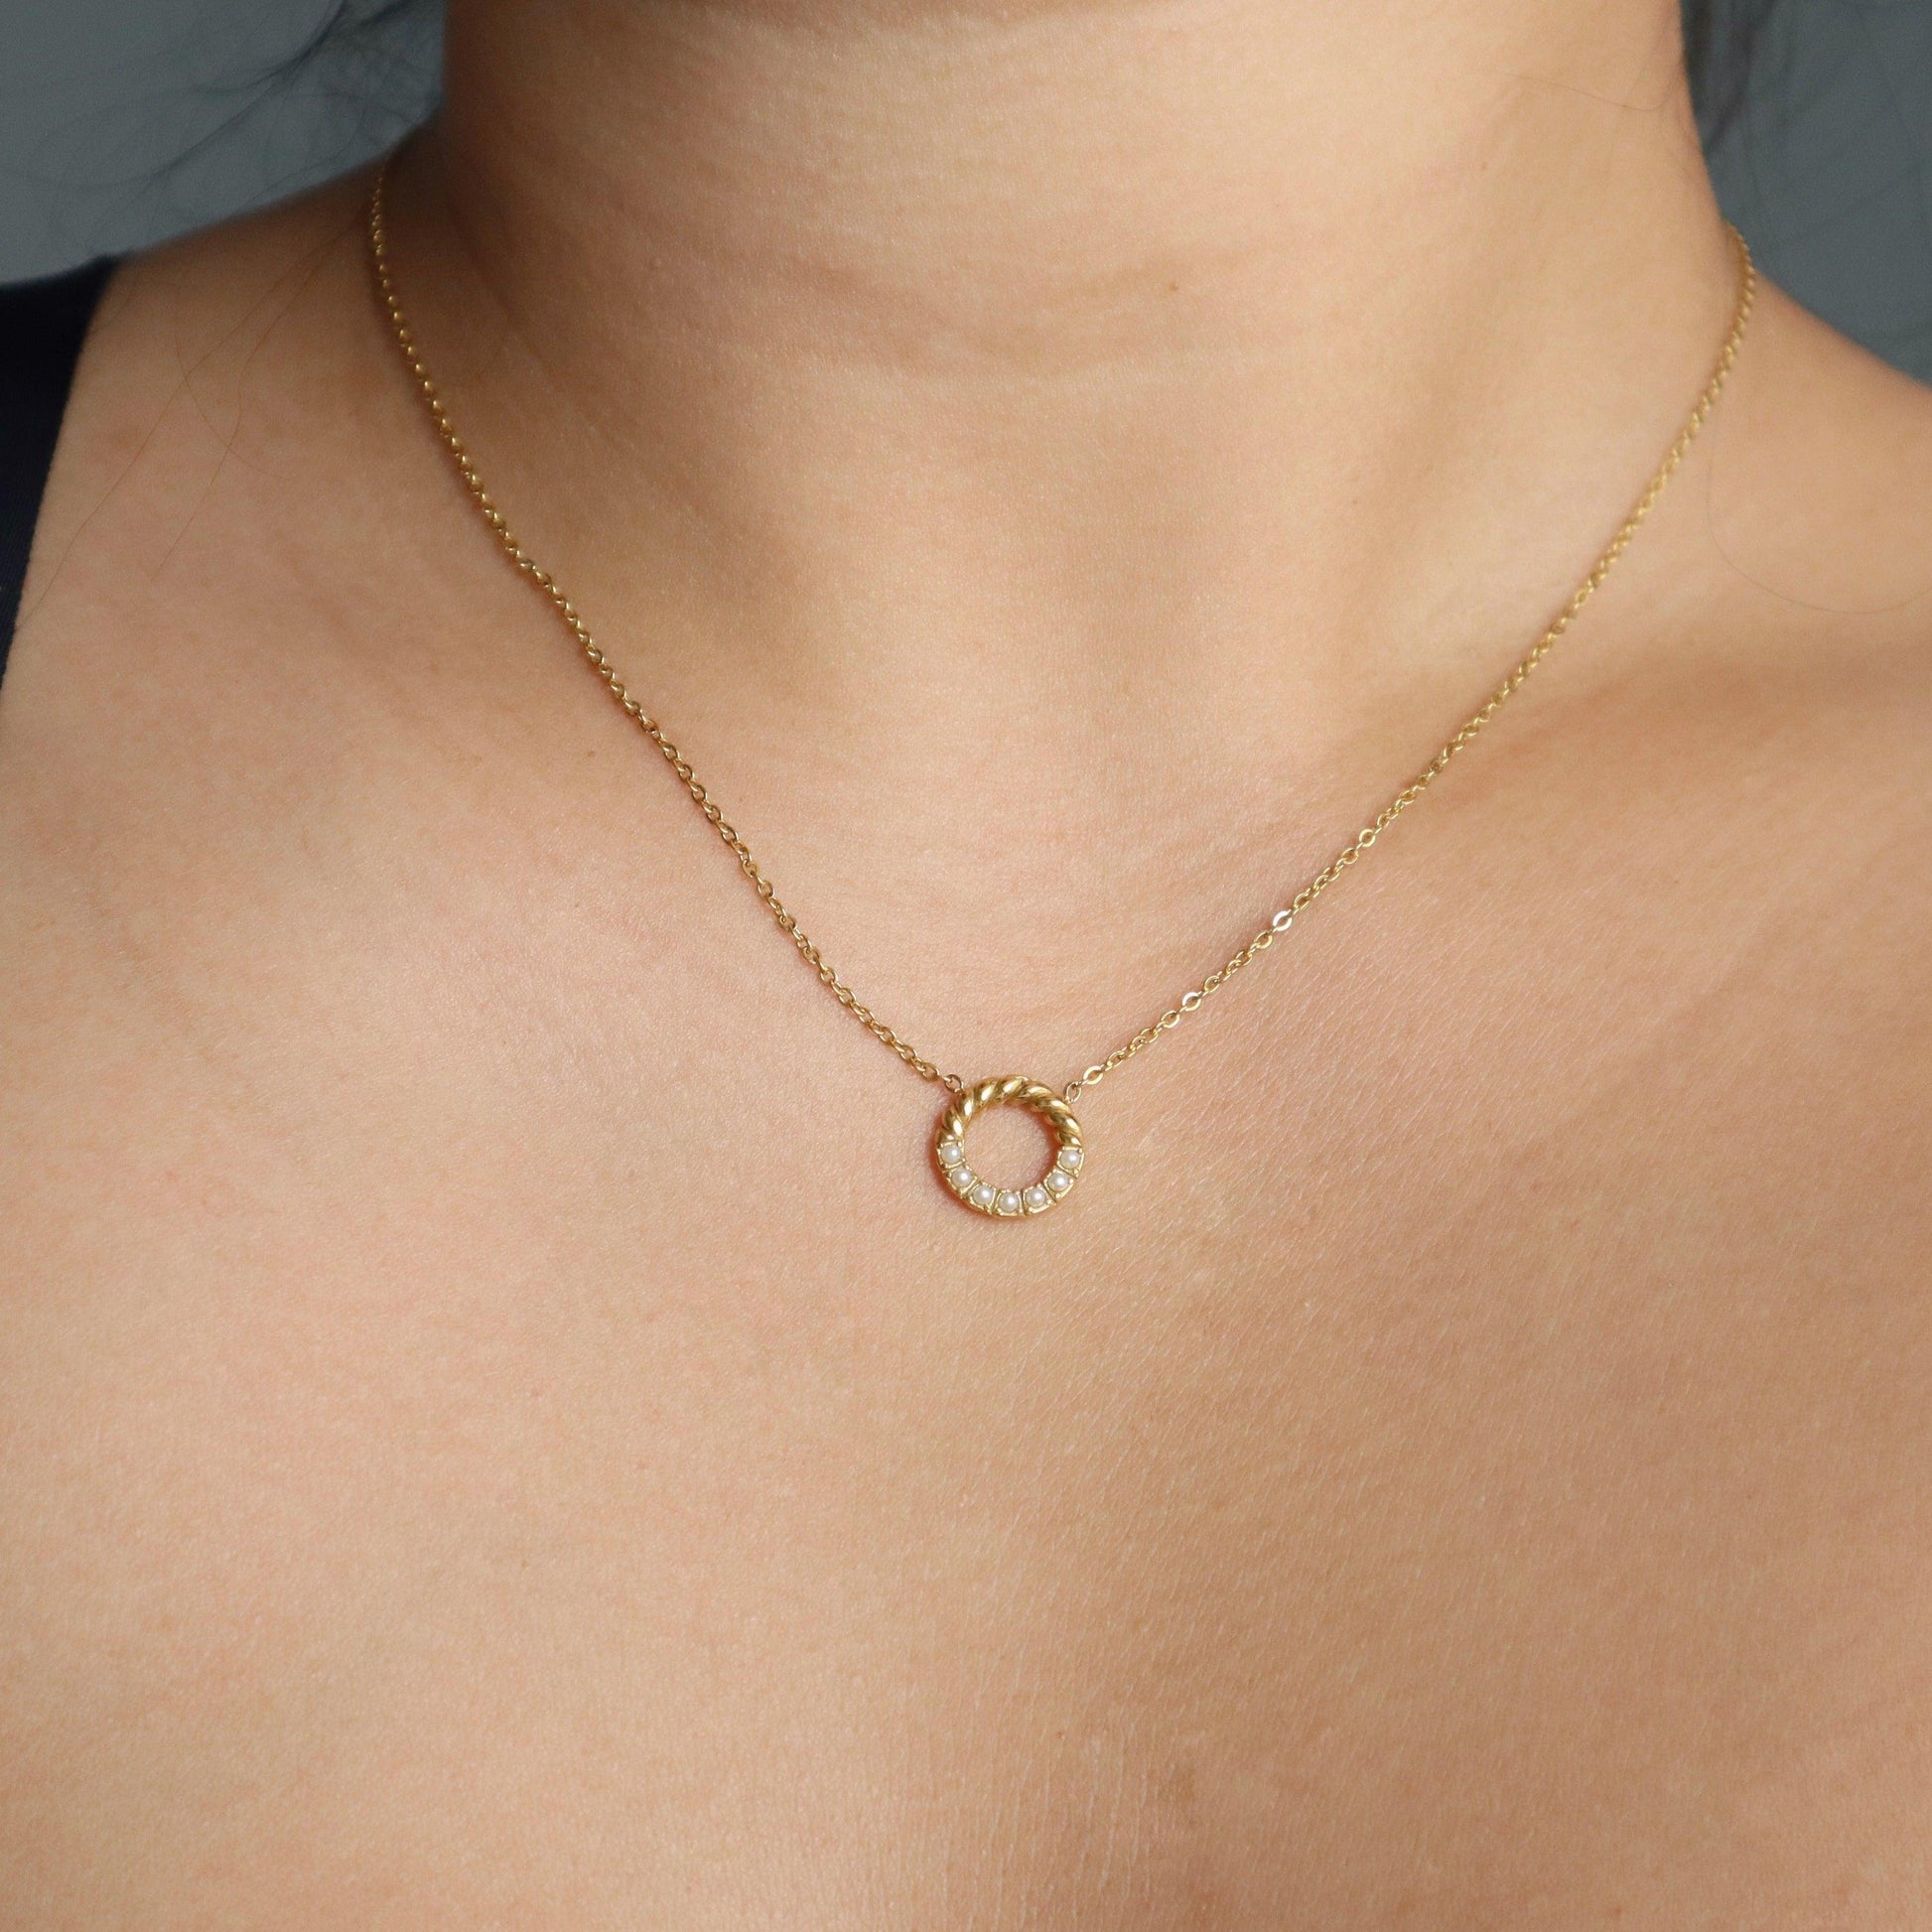 Chloe Necklace | Pearl Pendant Necklace - JESSA JEWELRY | GOLD JEWELRY; dainty, affordable gold everyday jewelry. Tarnish free, water-resistant, hypoallergenic. Jewelry for everyday wear